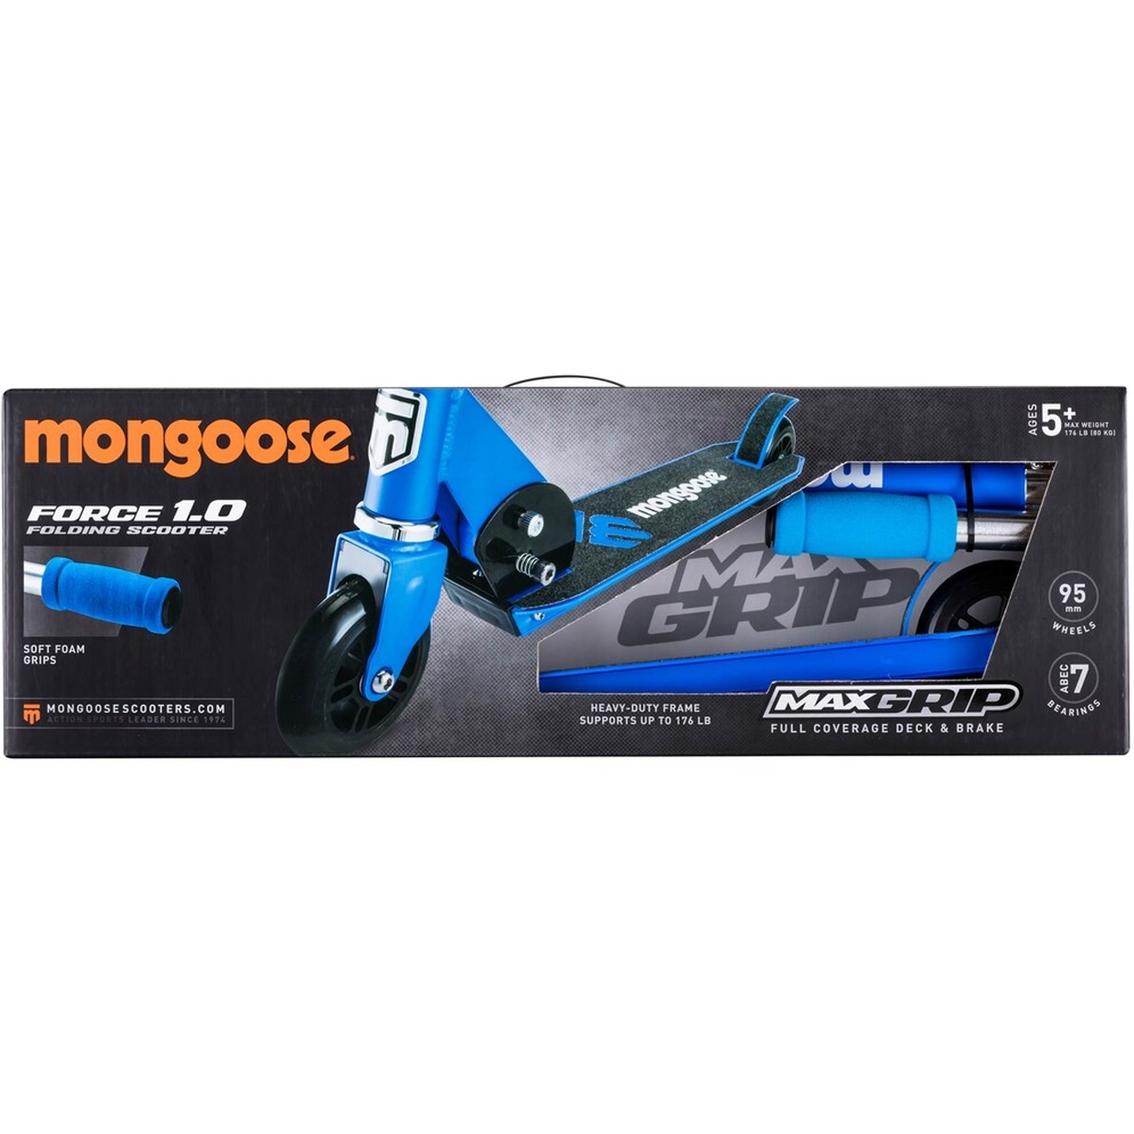 Mongoose Force 1.0 Folding Scooter - Image 2 of 7